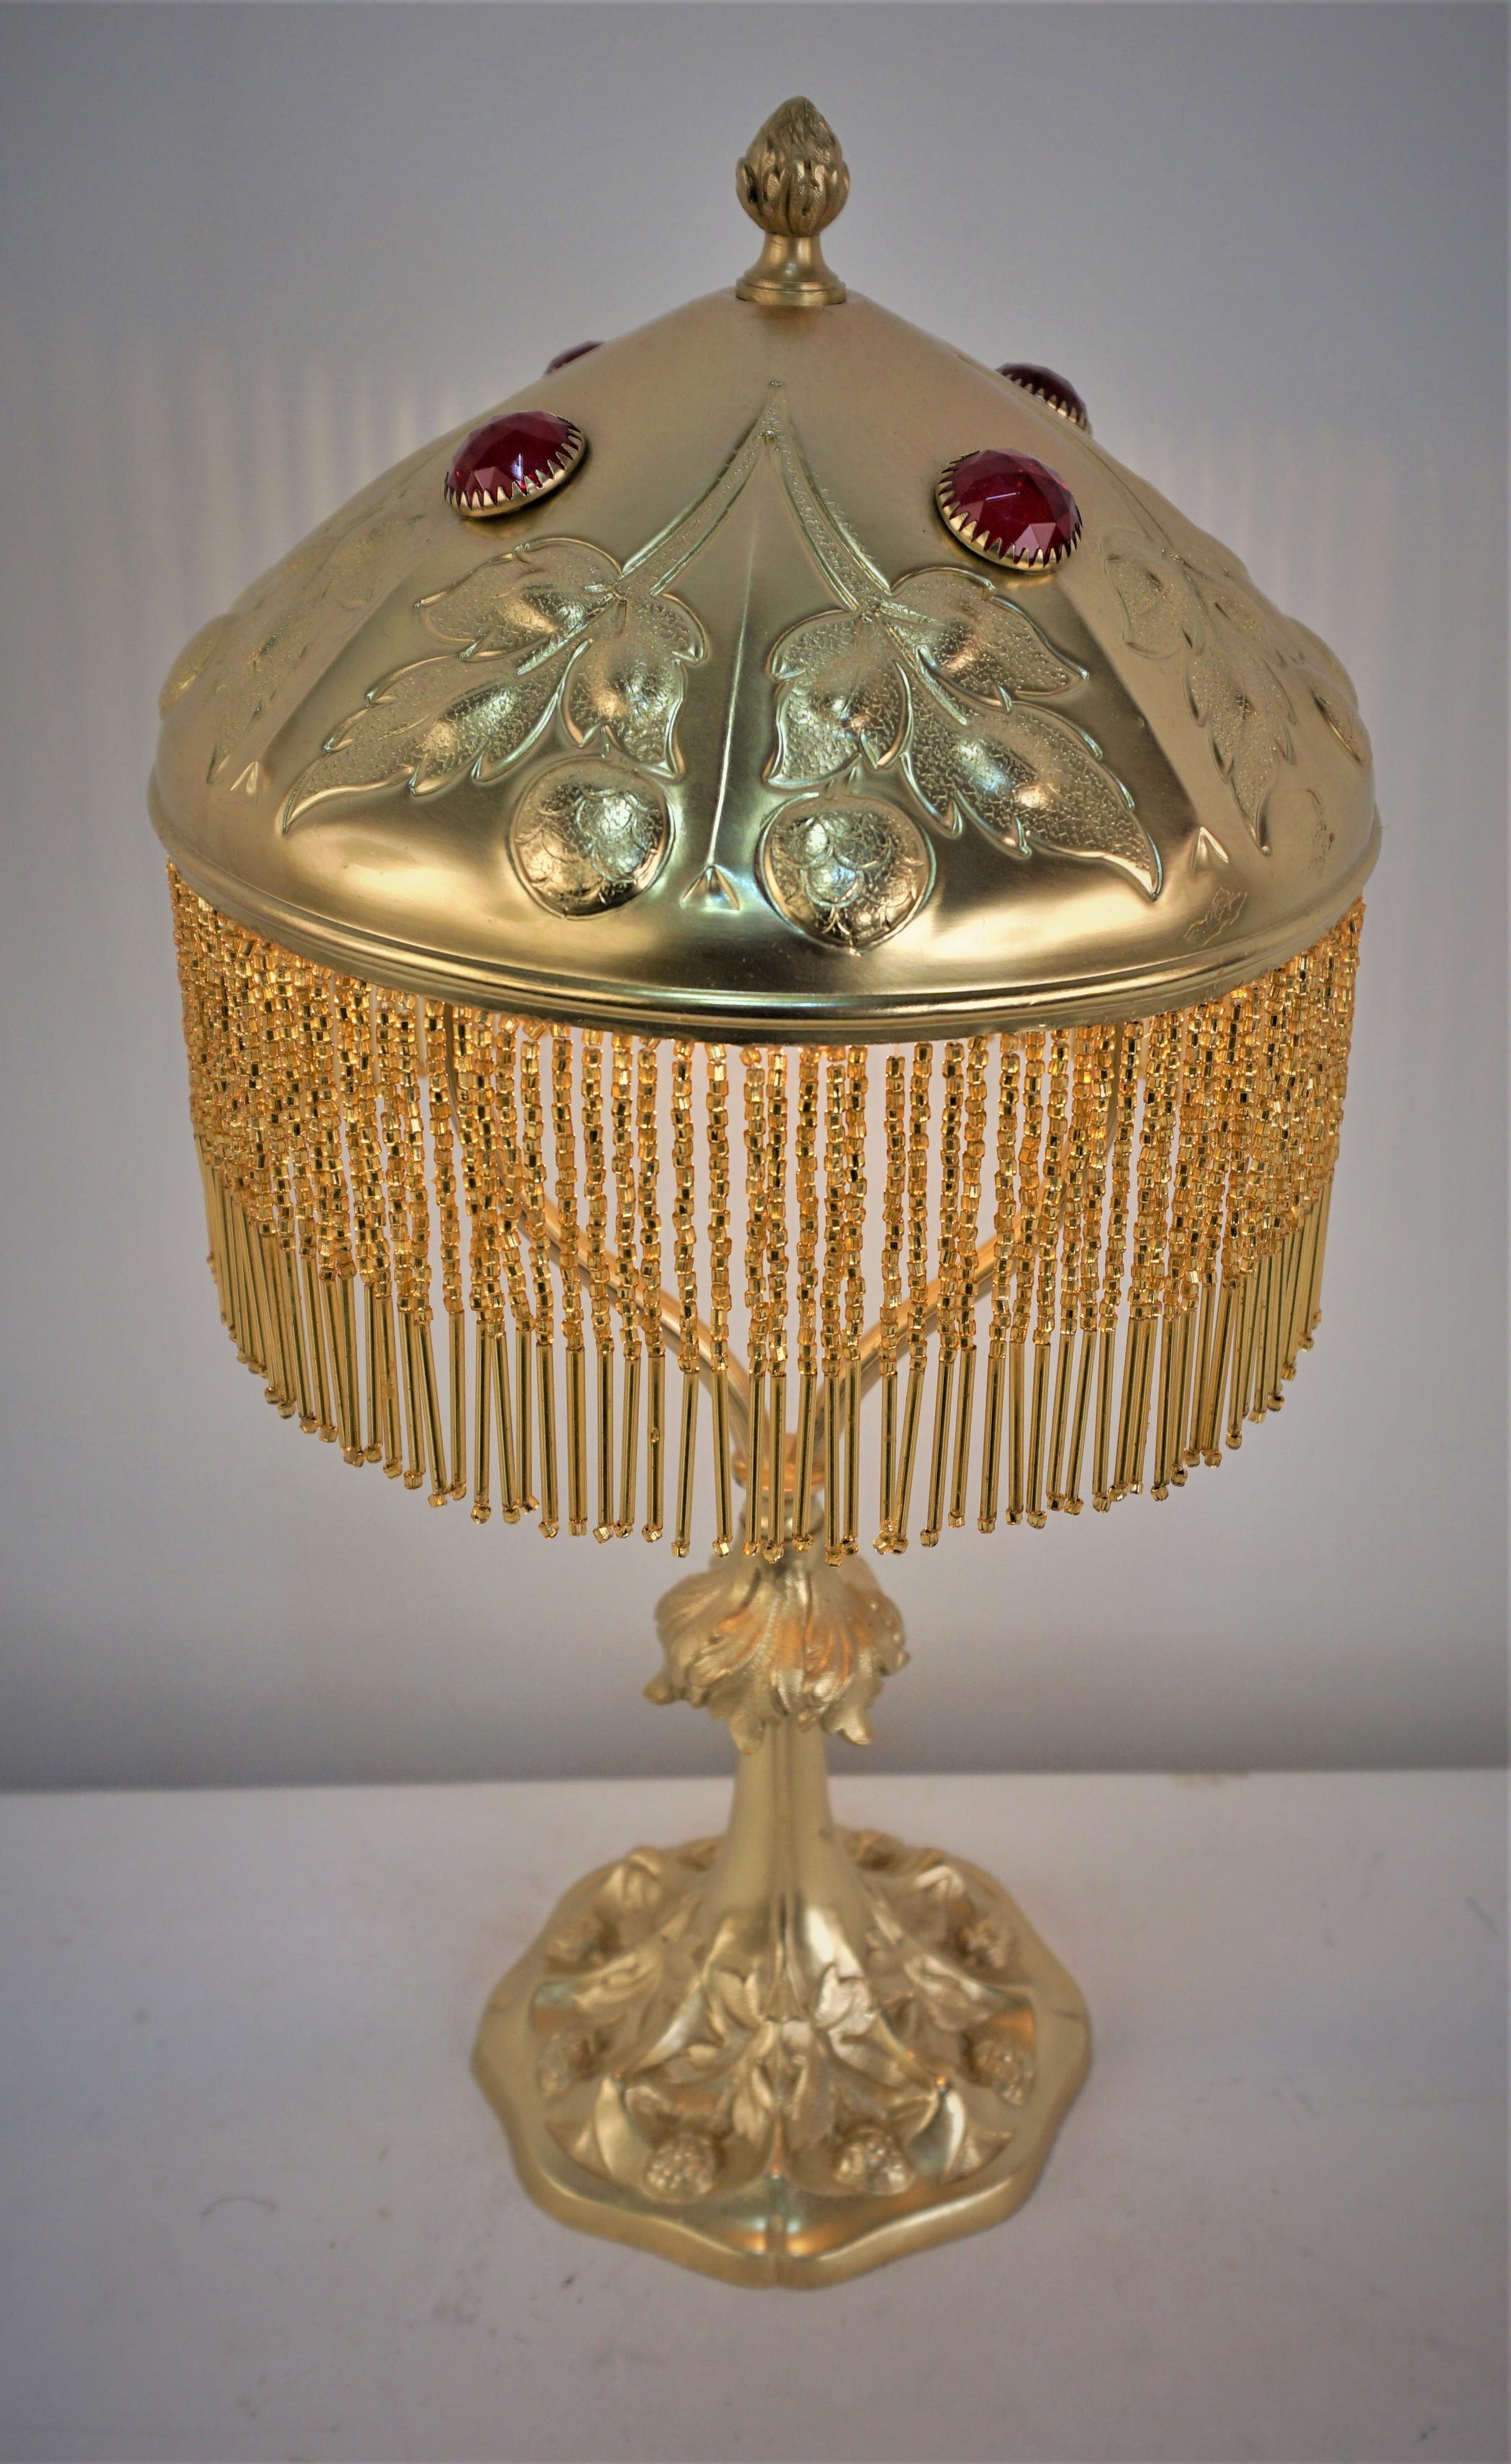 Bronze Art Nouveau table lamp with floral relief decoration and red glass jewel.